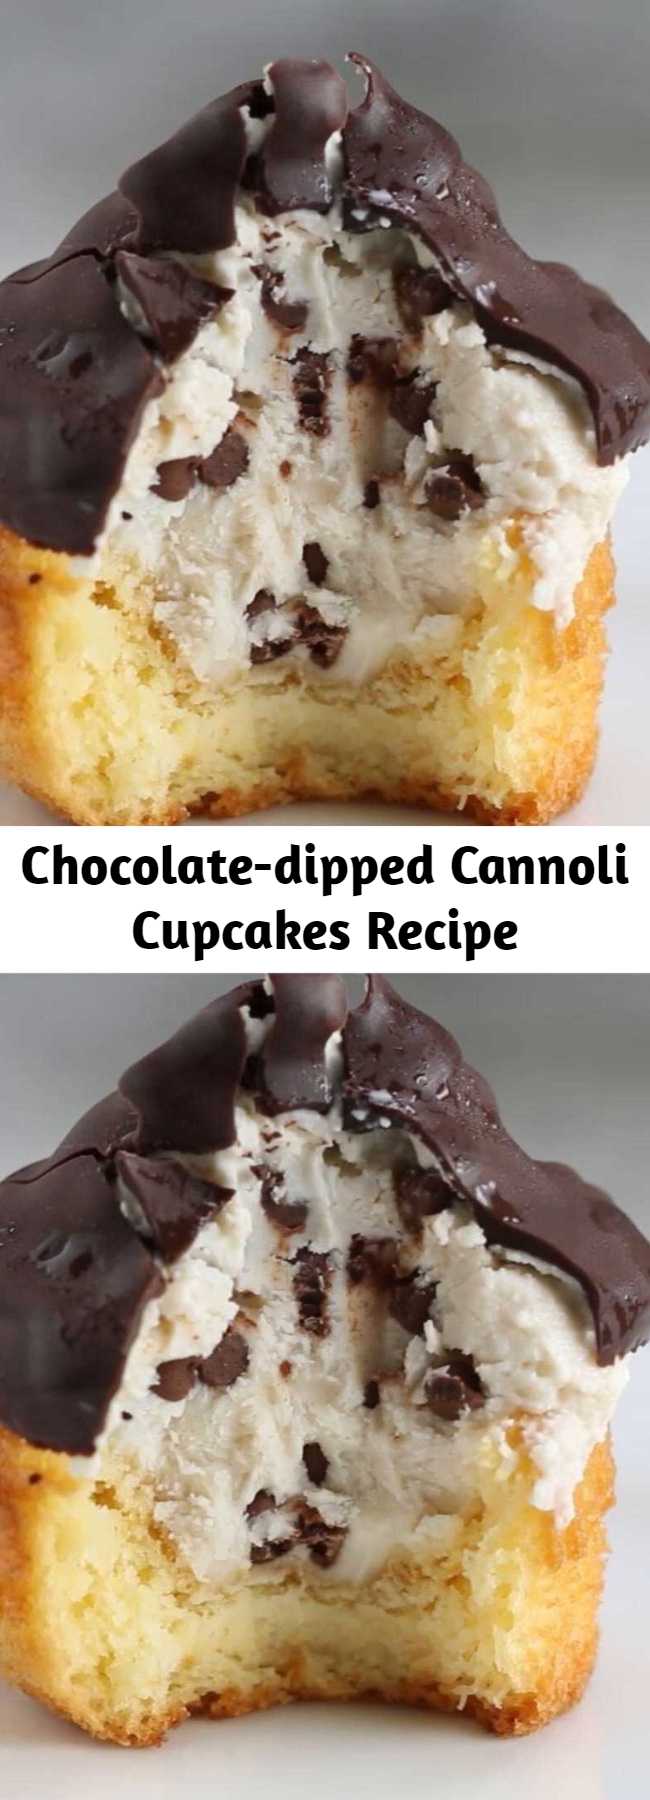 Chocolate-dipped Cannoli Cupcakes Recipe - Your favorite Italian dessert just got even better! This Chocolate Dipped Cannoli Cupcake taste just like your eating an Italian Cannoli only in cupcake form!